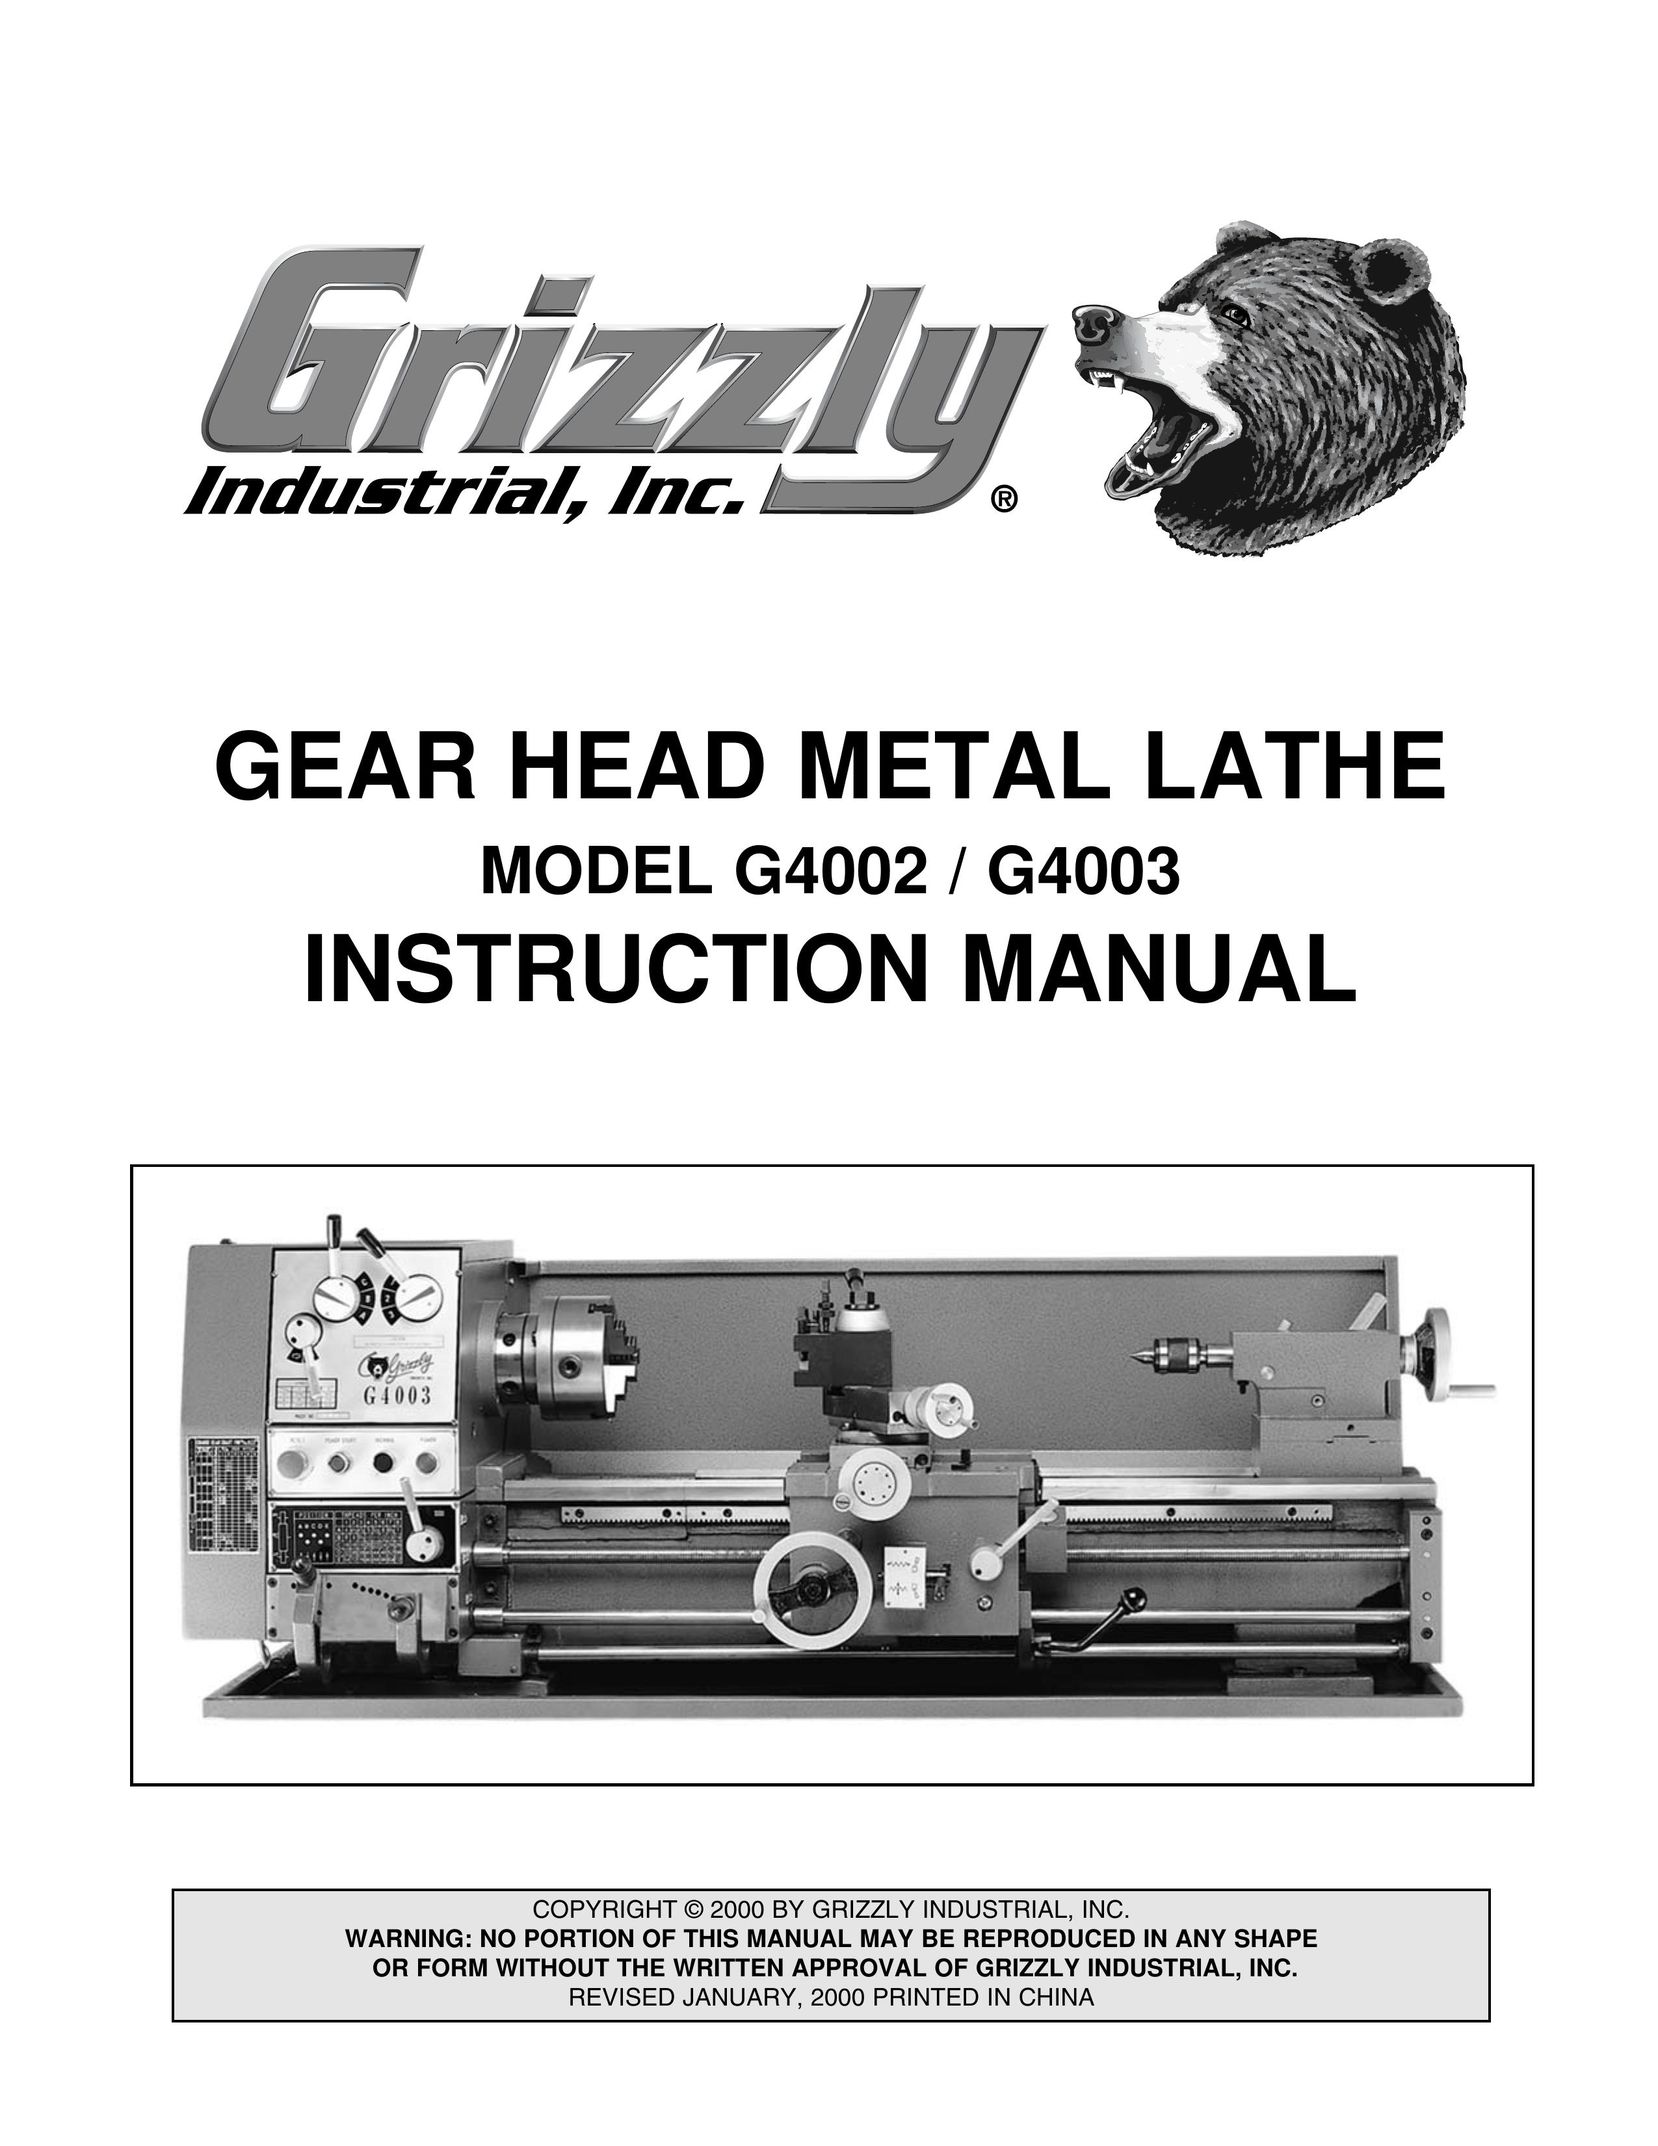 Grizzly G4003 Lathe User Manual